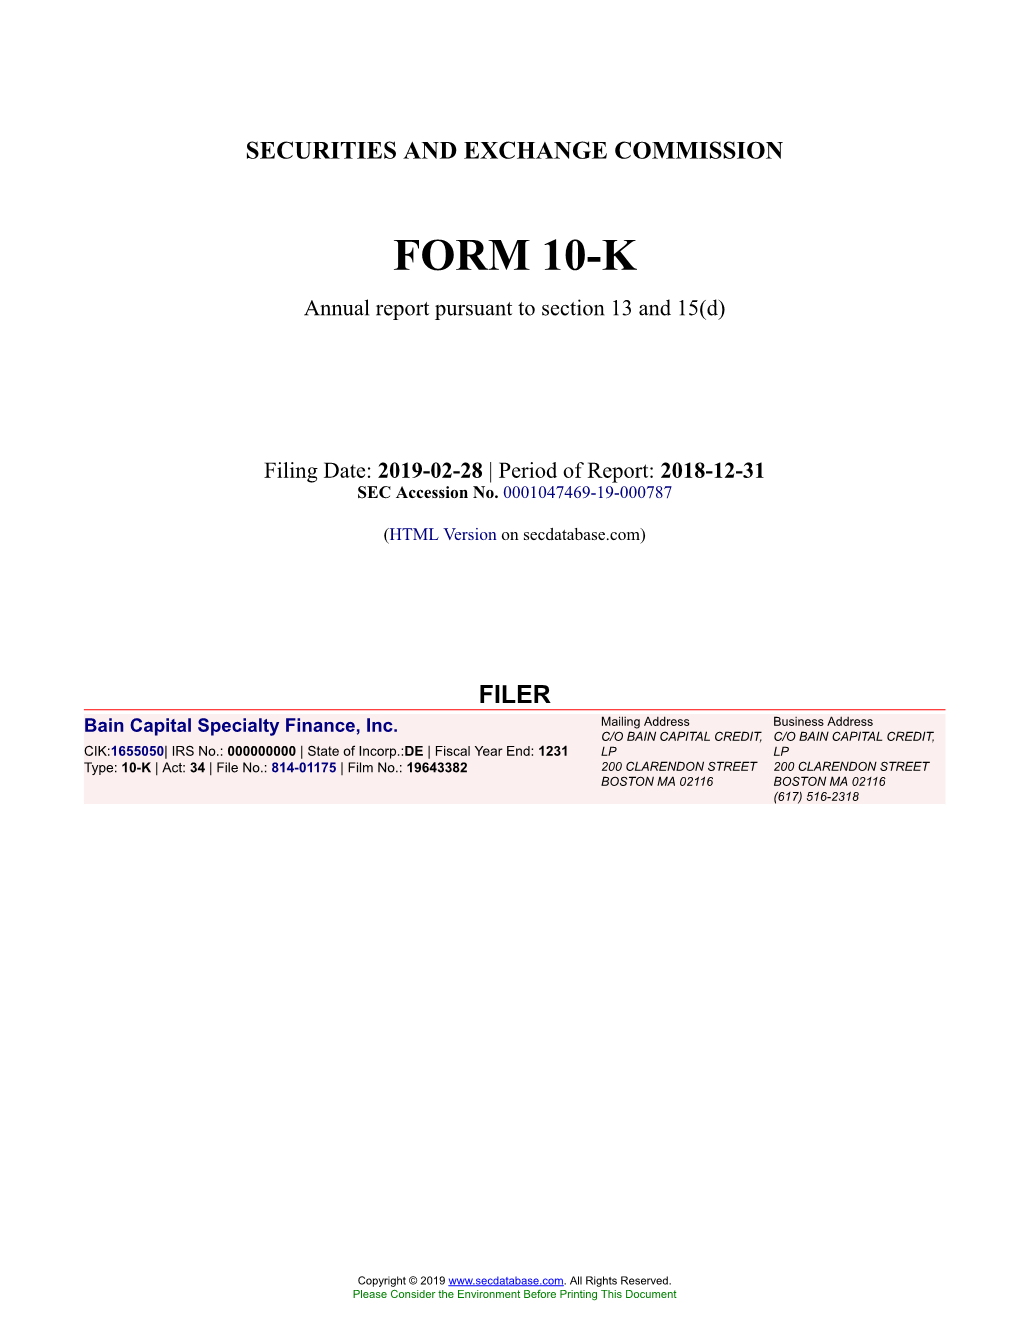 Bain Capital Specialty Finance, Inc. Form 10-K Annual Report Filed 2019-02-28